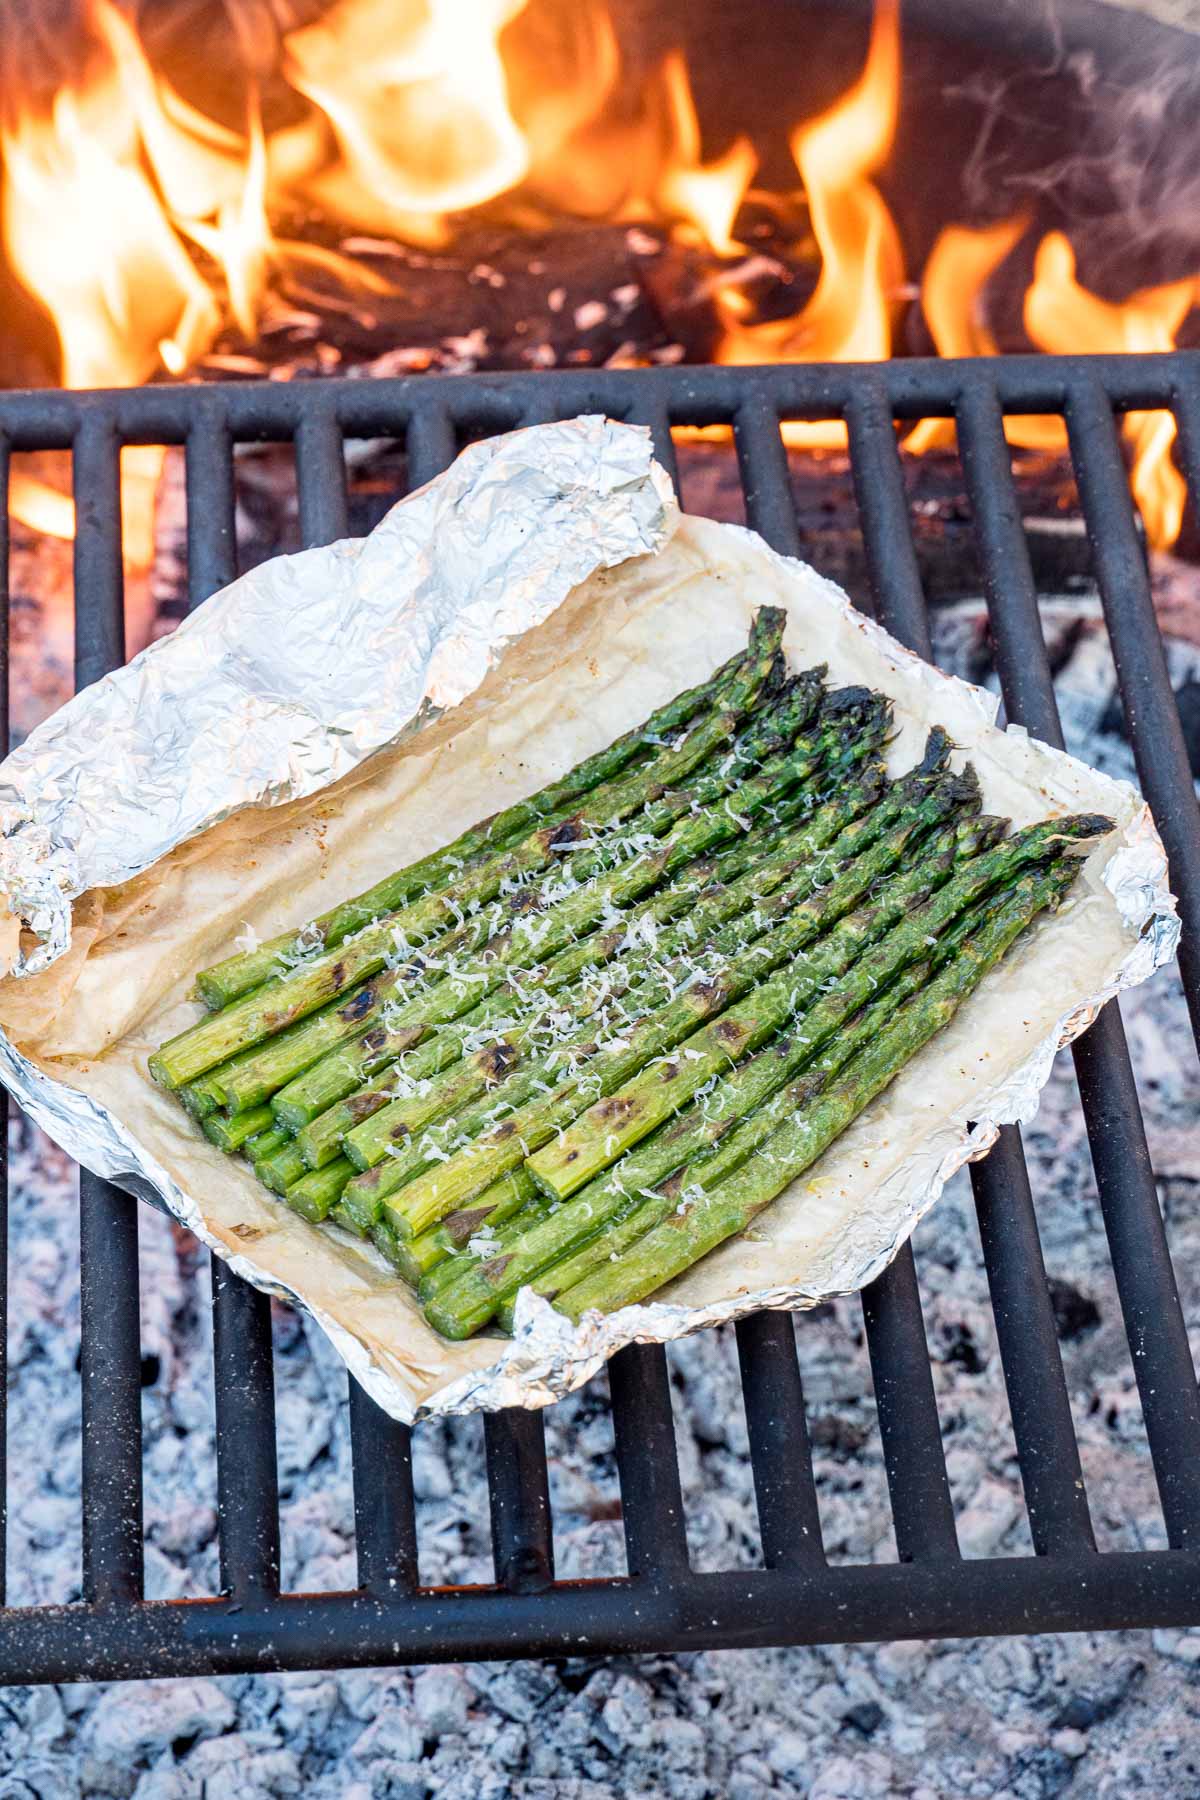 Grilled asparagus in a foil packet on a campfire